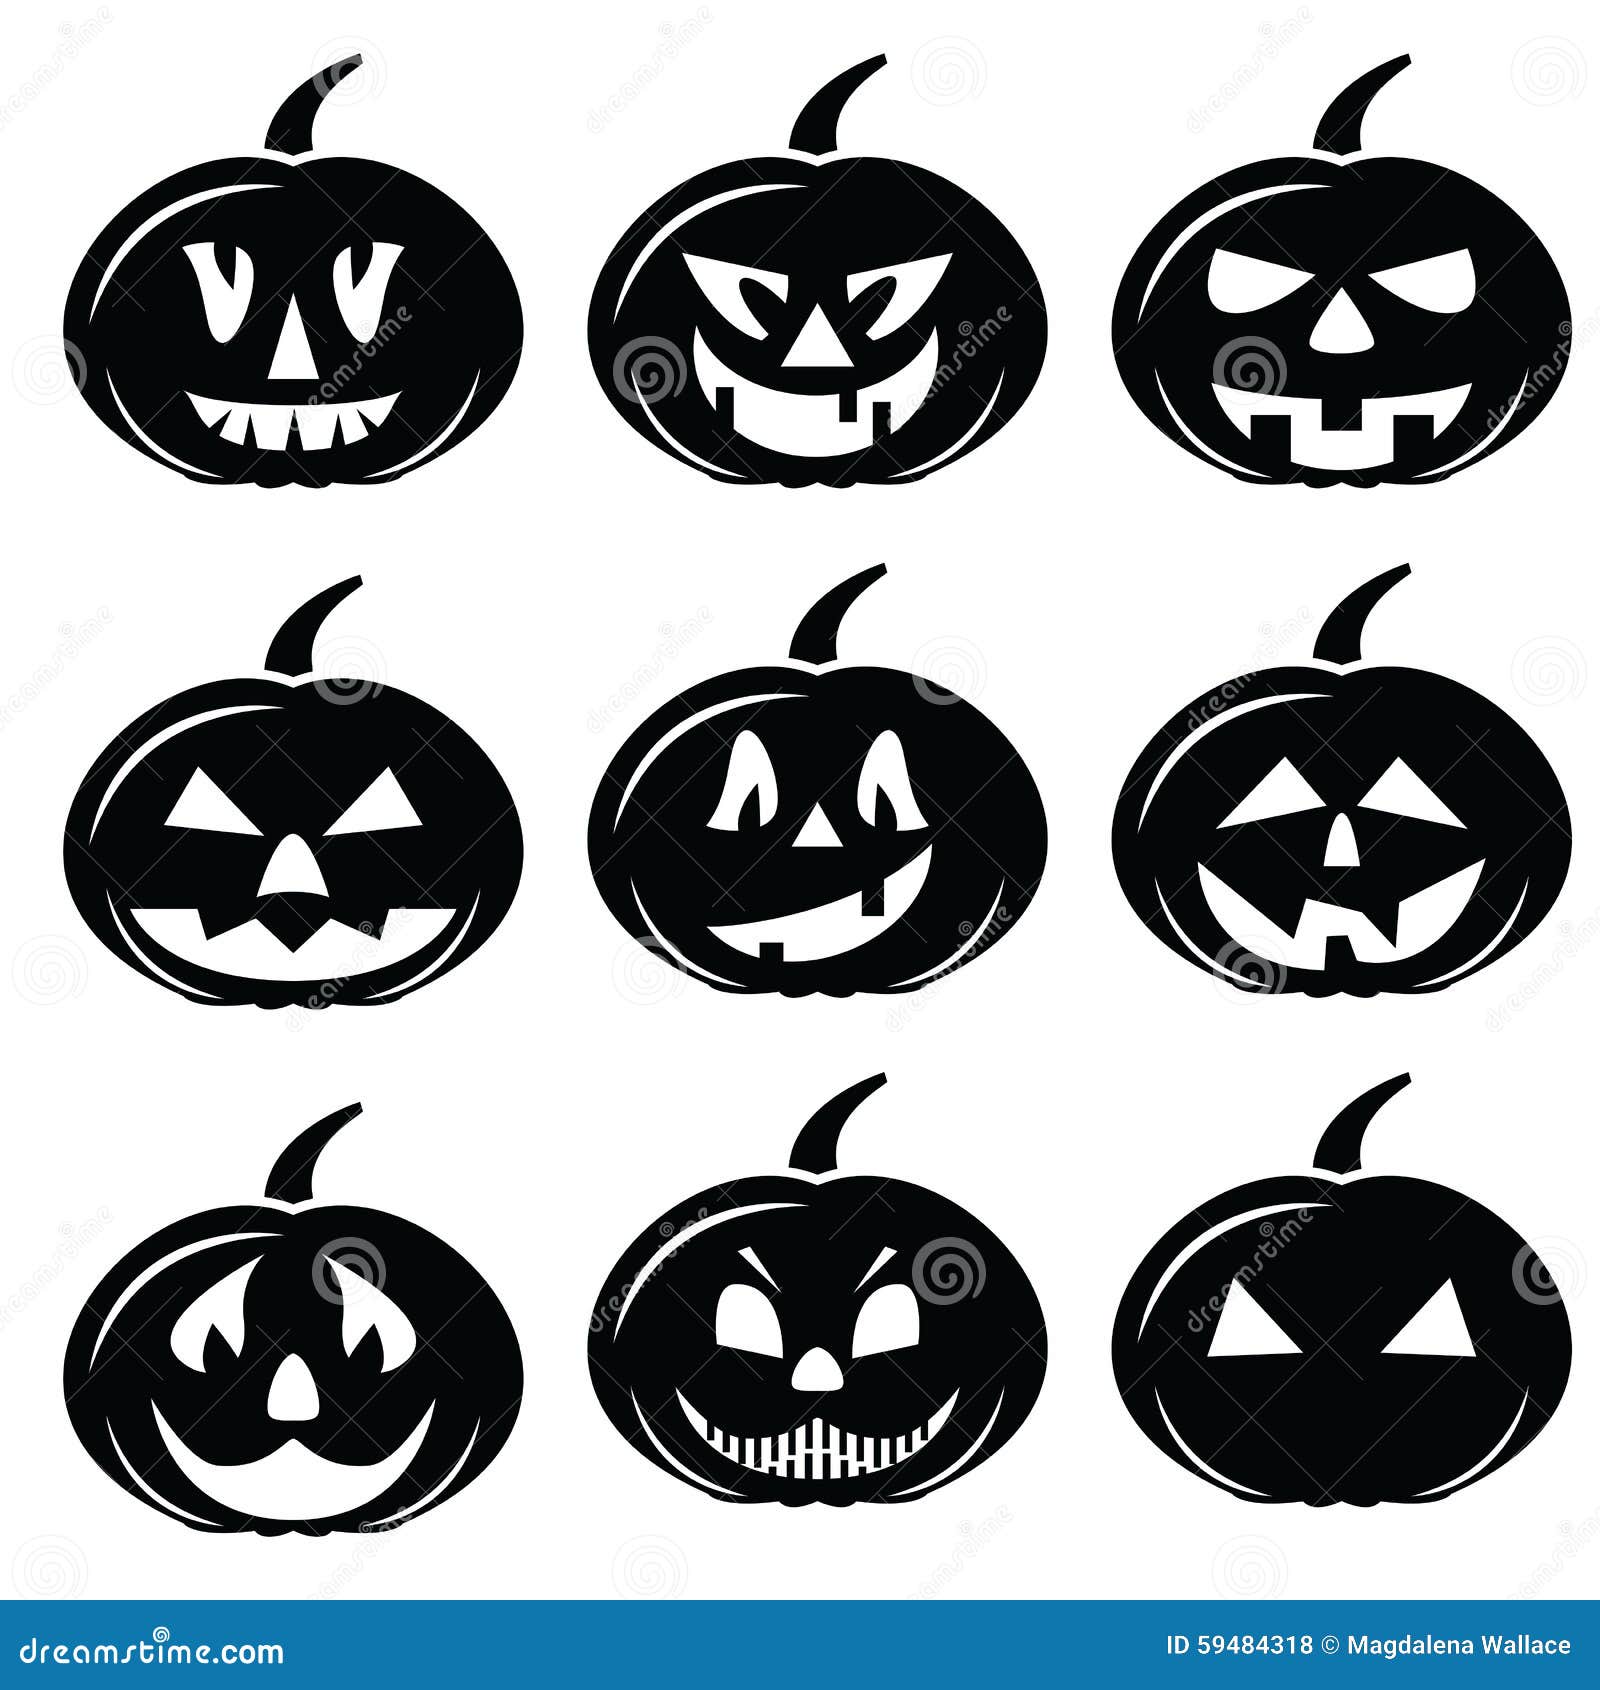 Scary Halloween Pumpkins Characters Icons Set In Black And White Stock ...